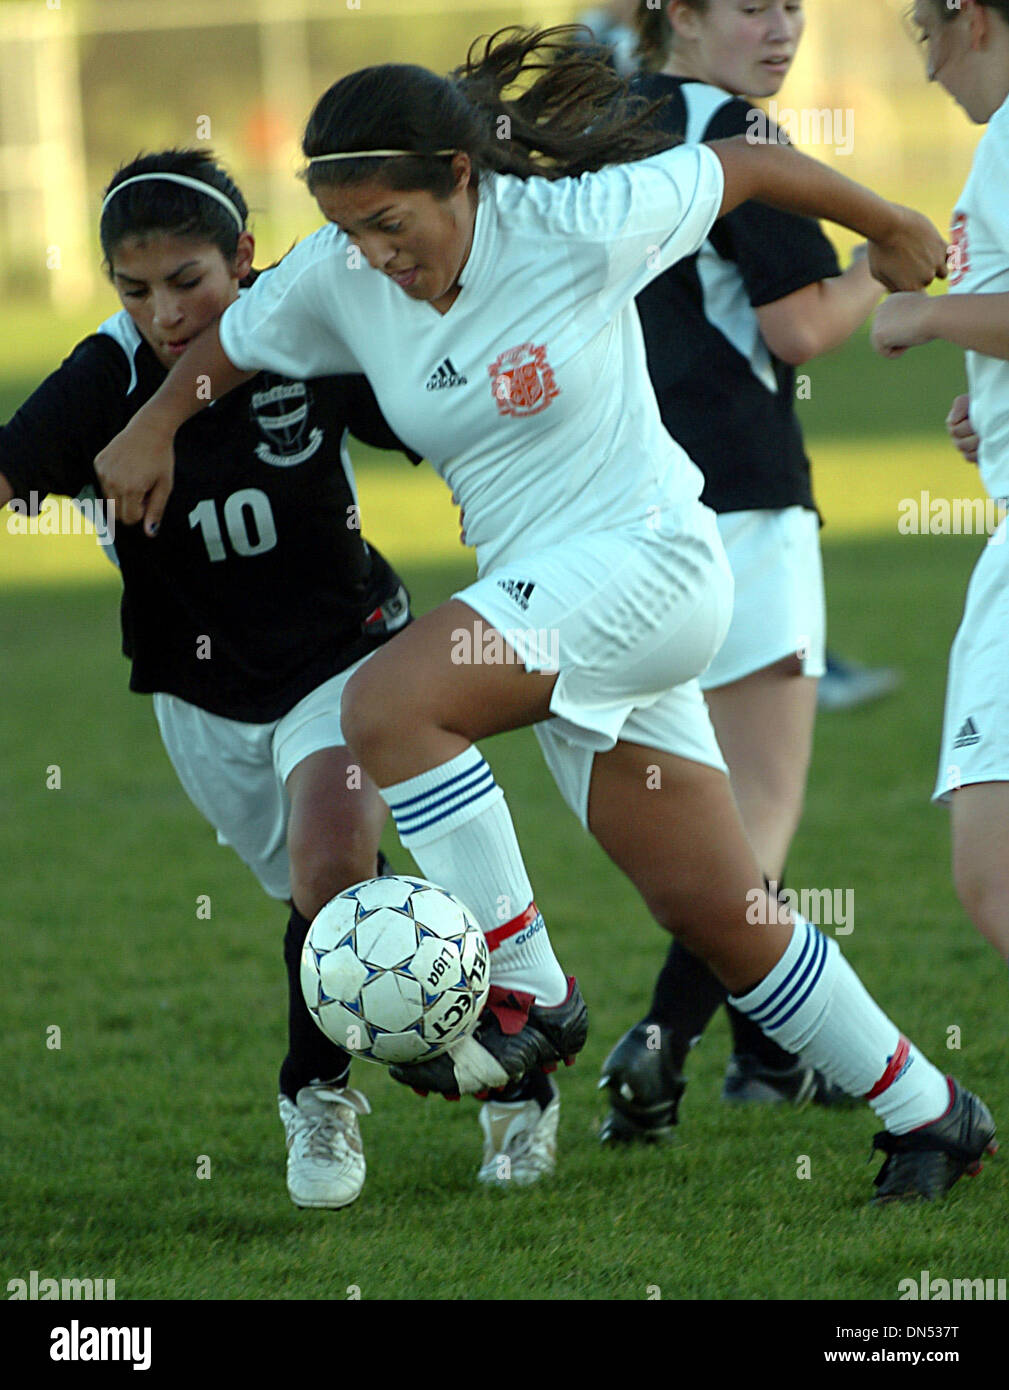 St. Joseph's Erica Jasso plays a ball in front of Salesian's Clarissa Ramirez (10) during their BSAL opener girls soccer game in Alameda, Calif., on Wednesday, November 28, 2007. .(Dean Coppola/Contra Costa Times/ZUMA Press) Stock Photo